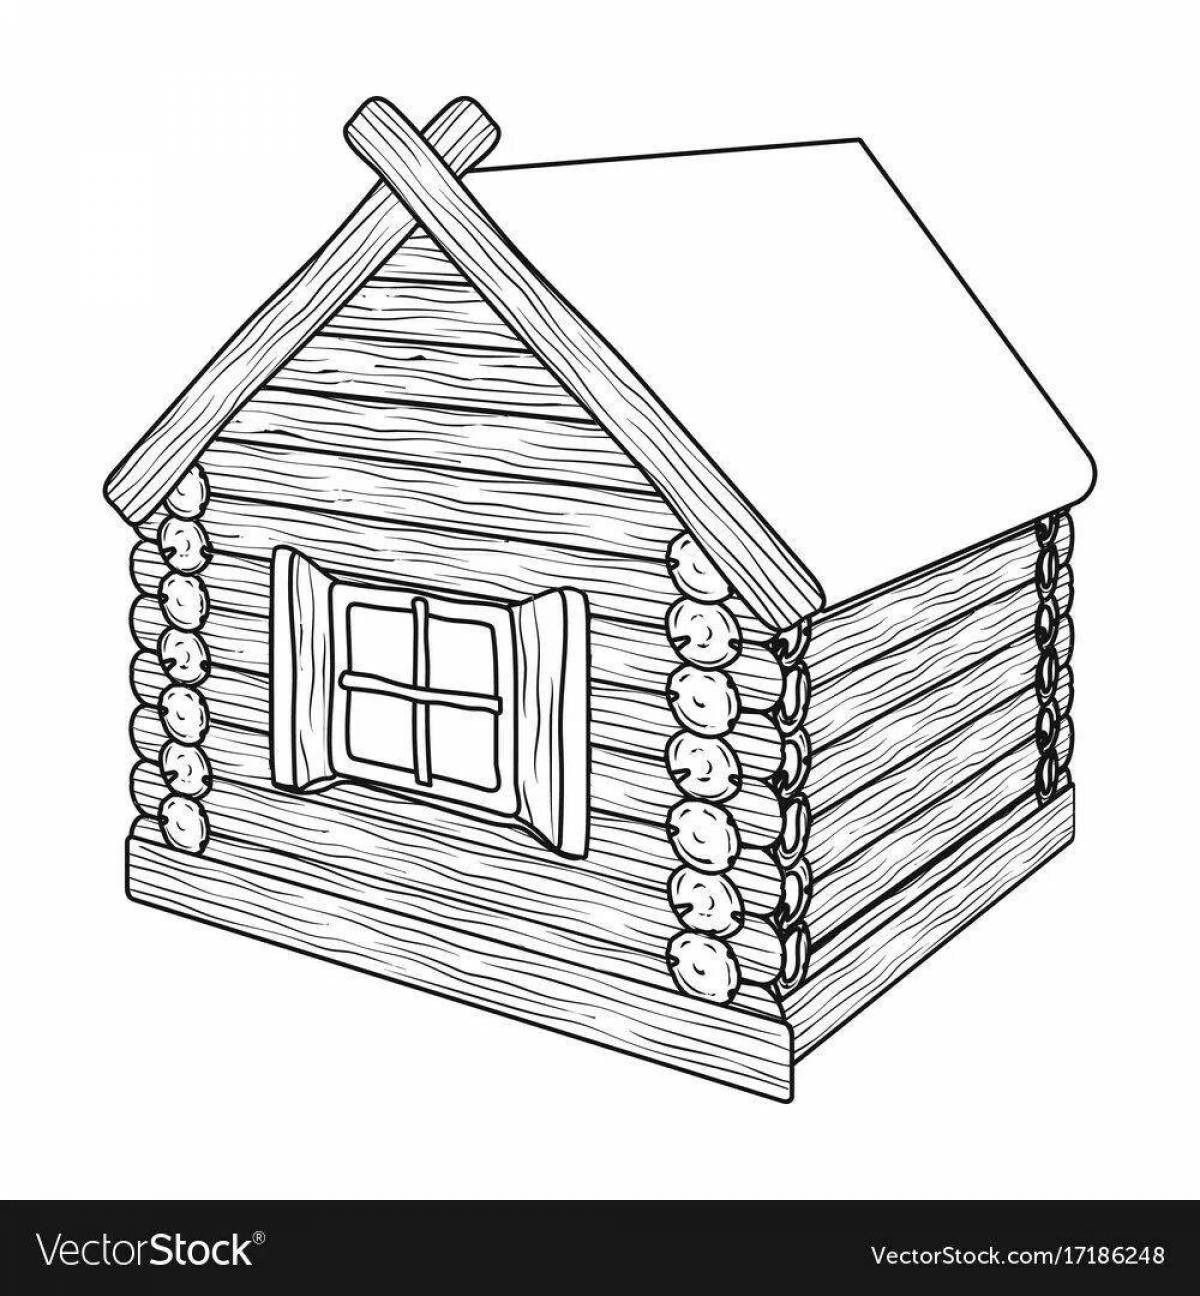 Charming wooden house coloring book for kids